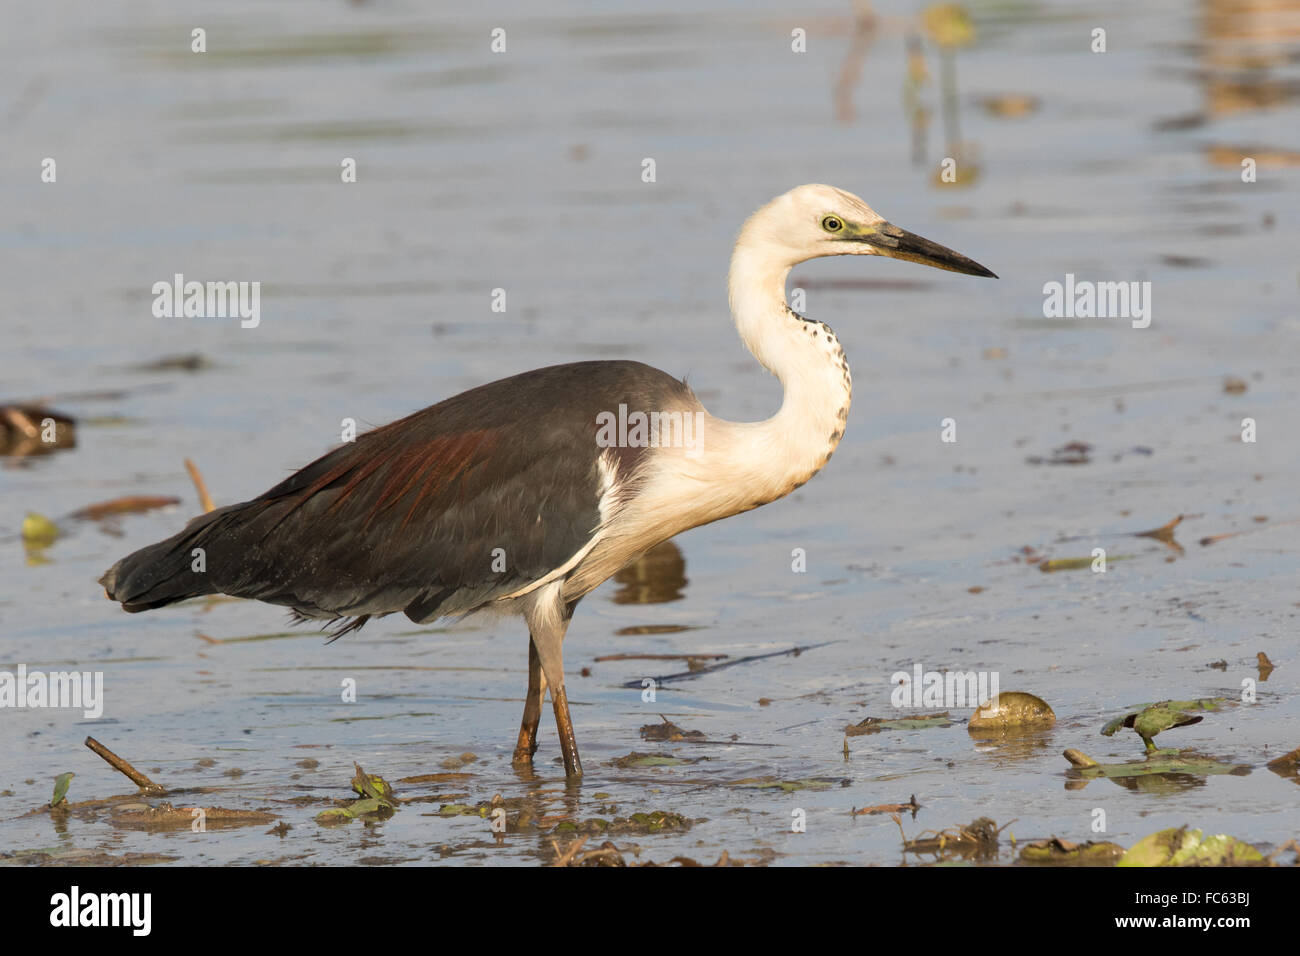 White-necked Heron (Ardea pacifica) wading in a waterlily-rich lagoon Stock Photo